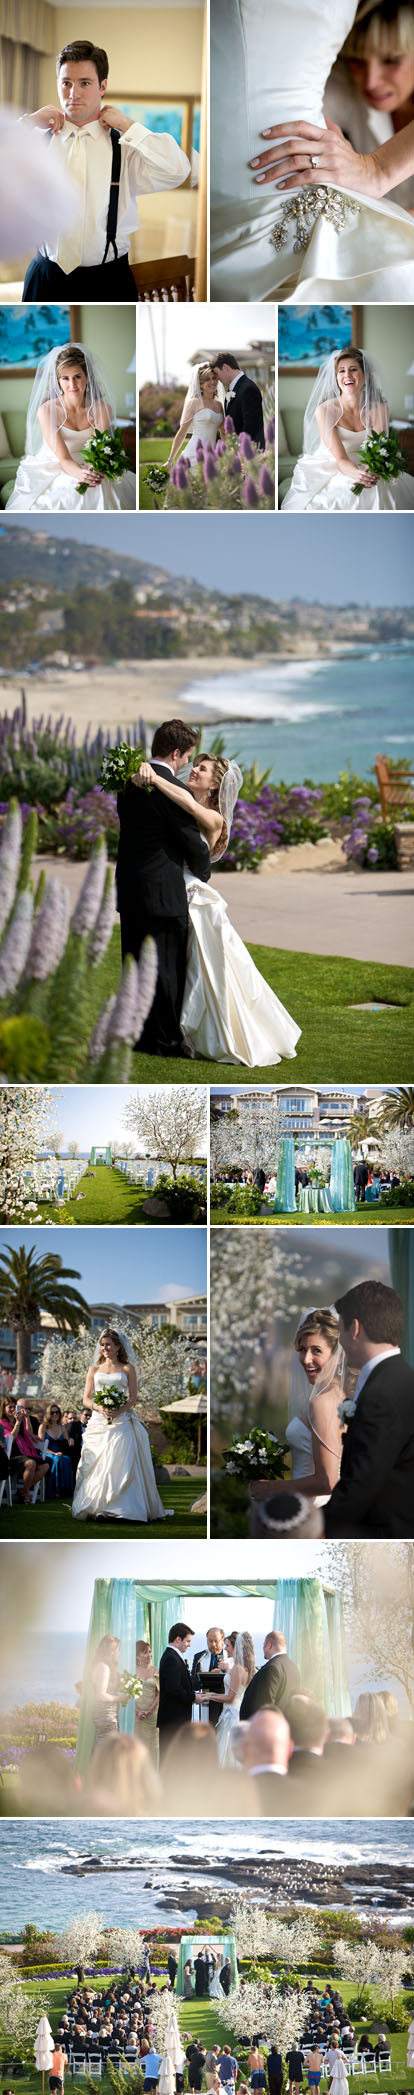 Images by Ira Lippke Studios, spring wedding ceremony and reception at the Montage Laguna Beach